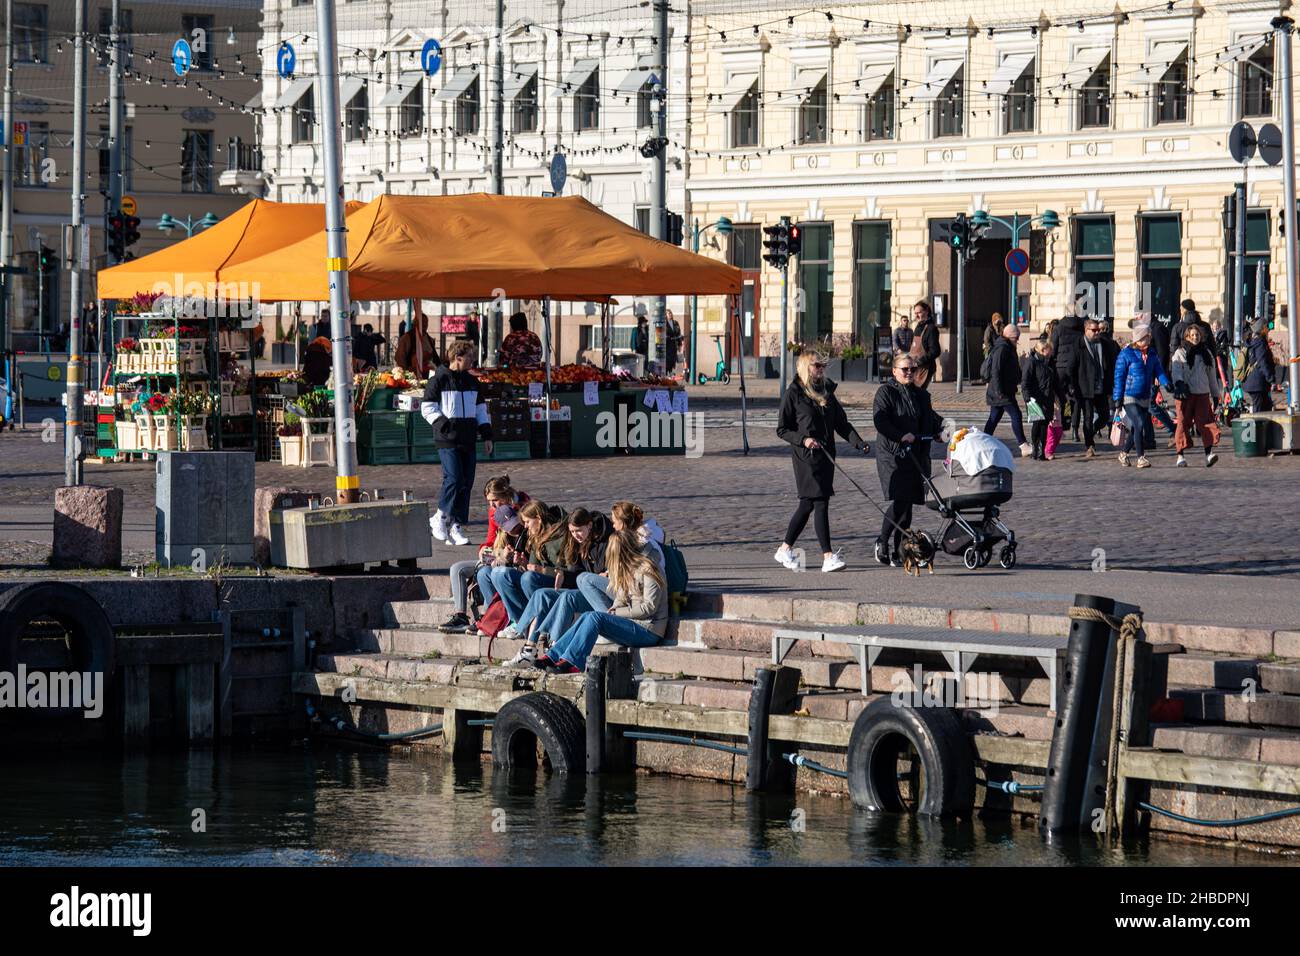 Group of young women or teenagers sitting on Kolera-allas dock by Kauppatori or Market Square in Helsinki, Finland Stock Photo